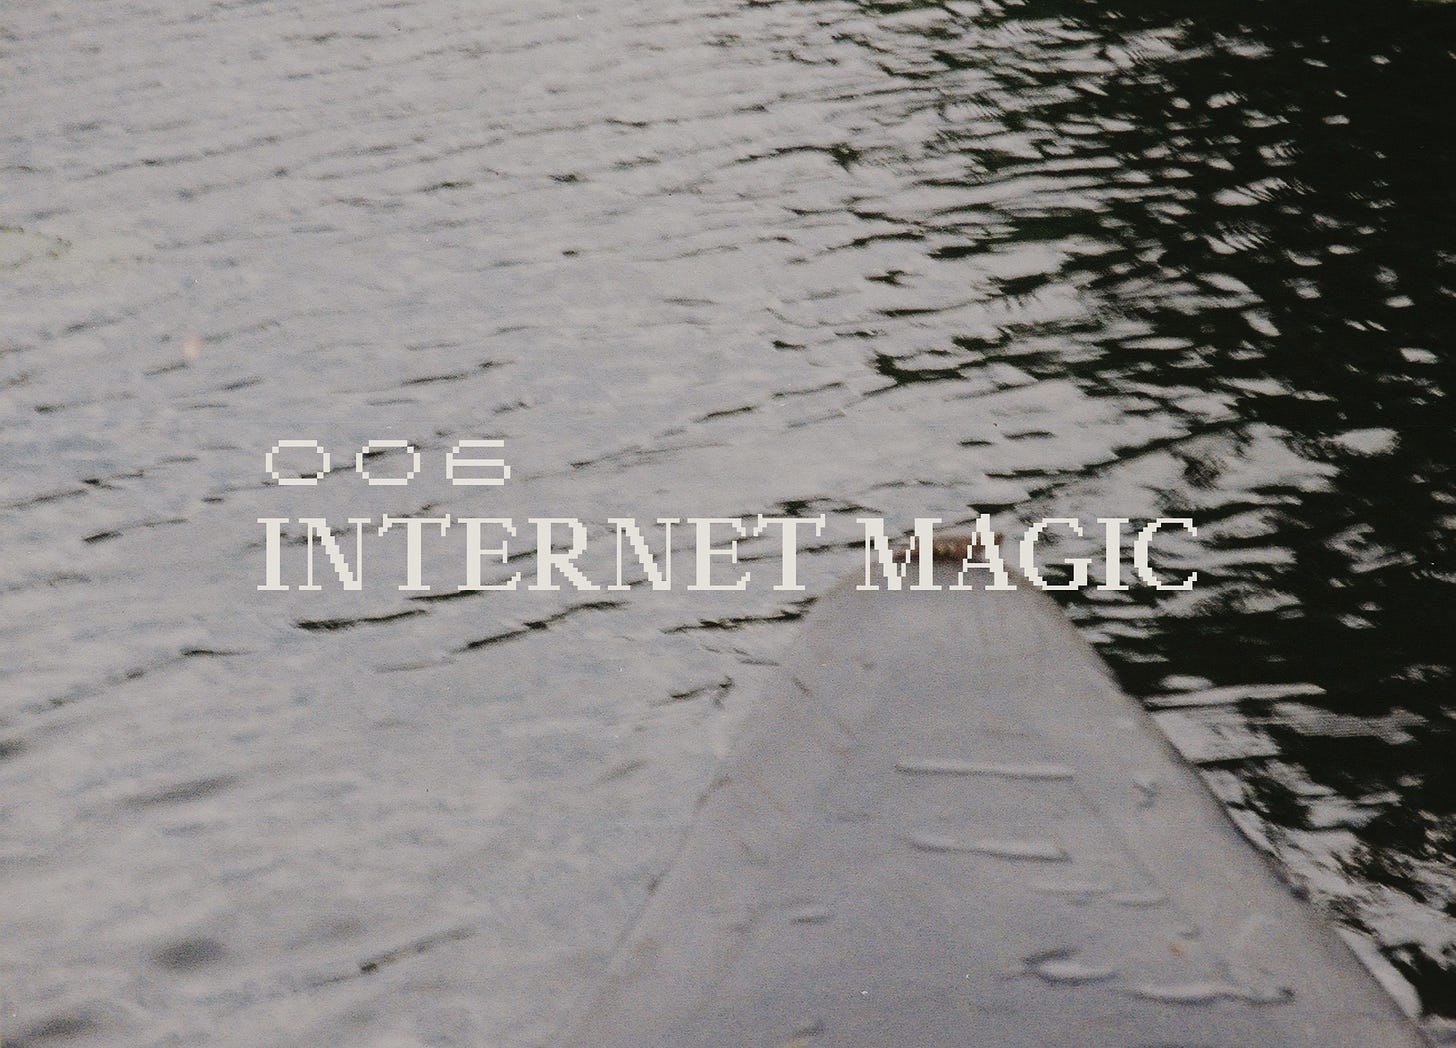 POV tip of a canoe on a dark, rippling lake.. Distorted film quality, reads "006 Internet Magic" in a pixelated serif font.